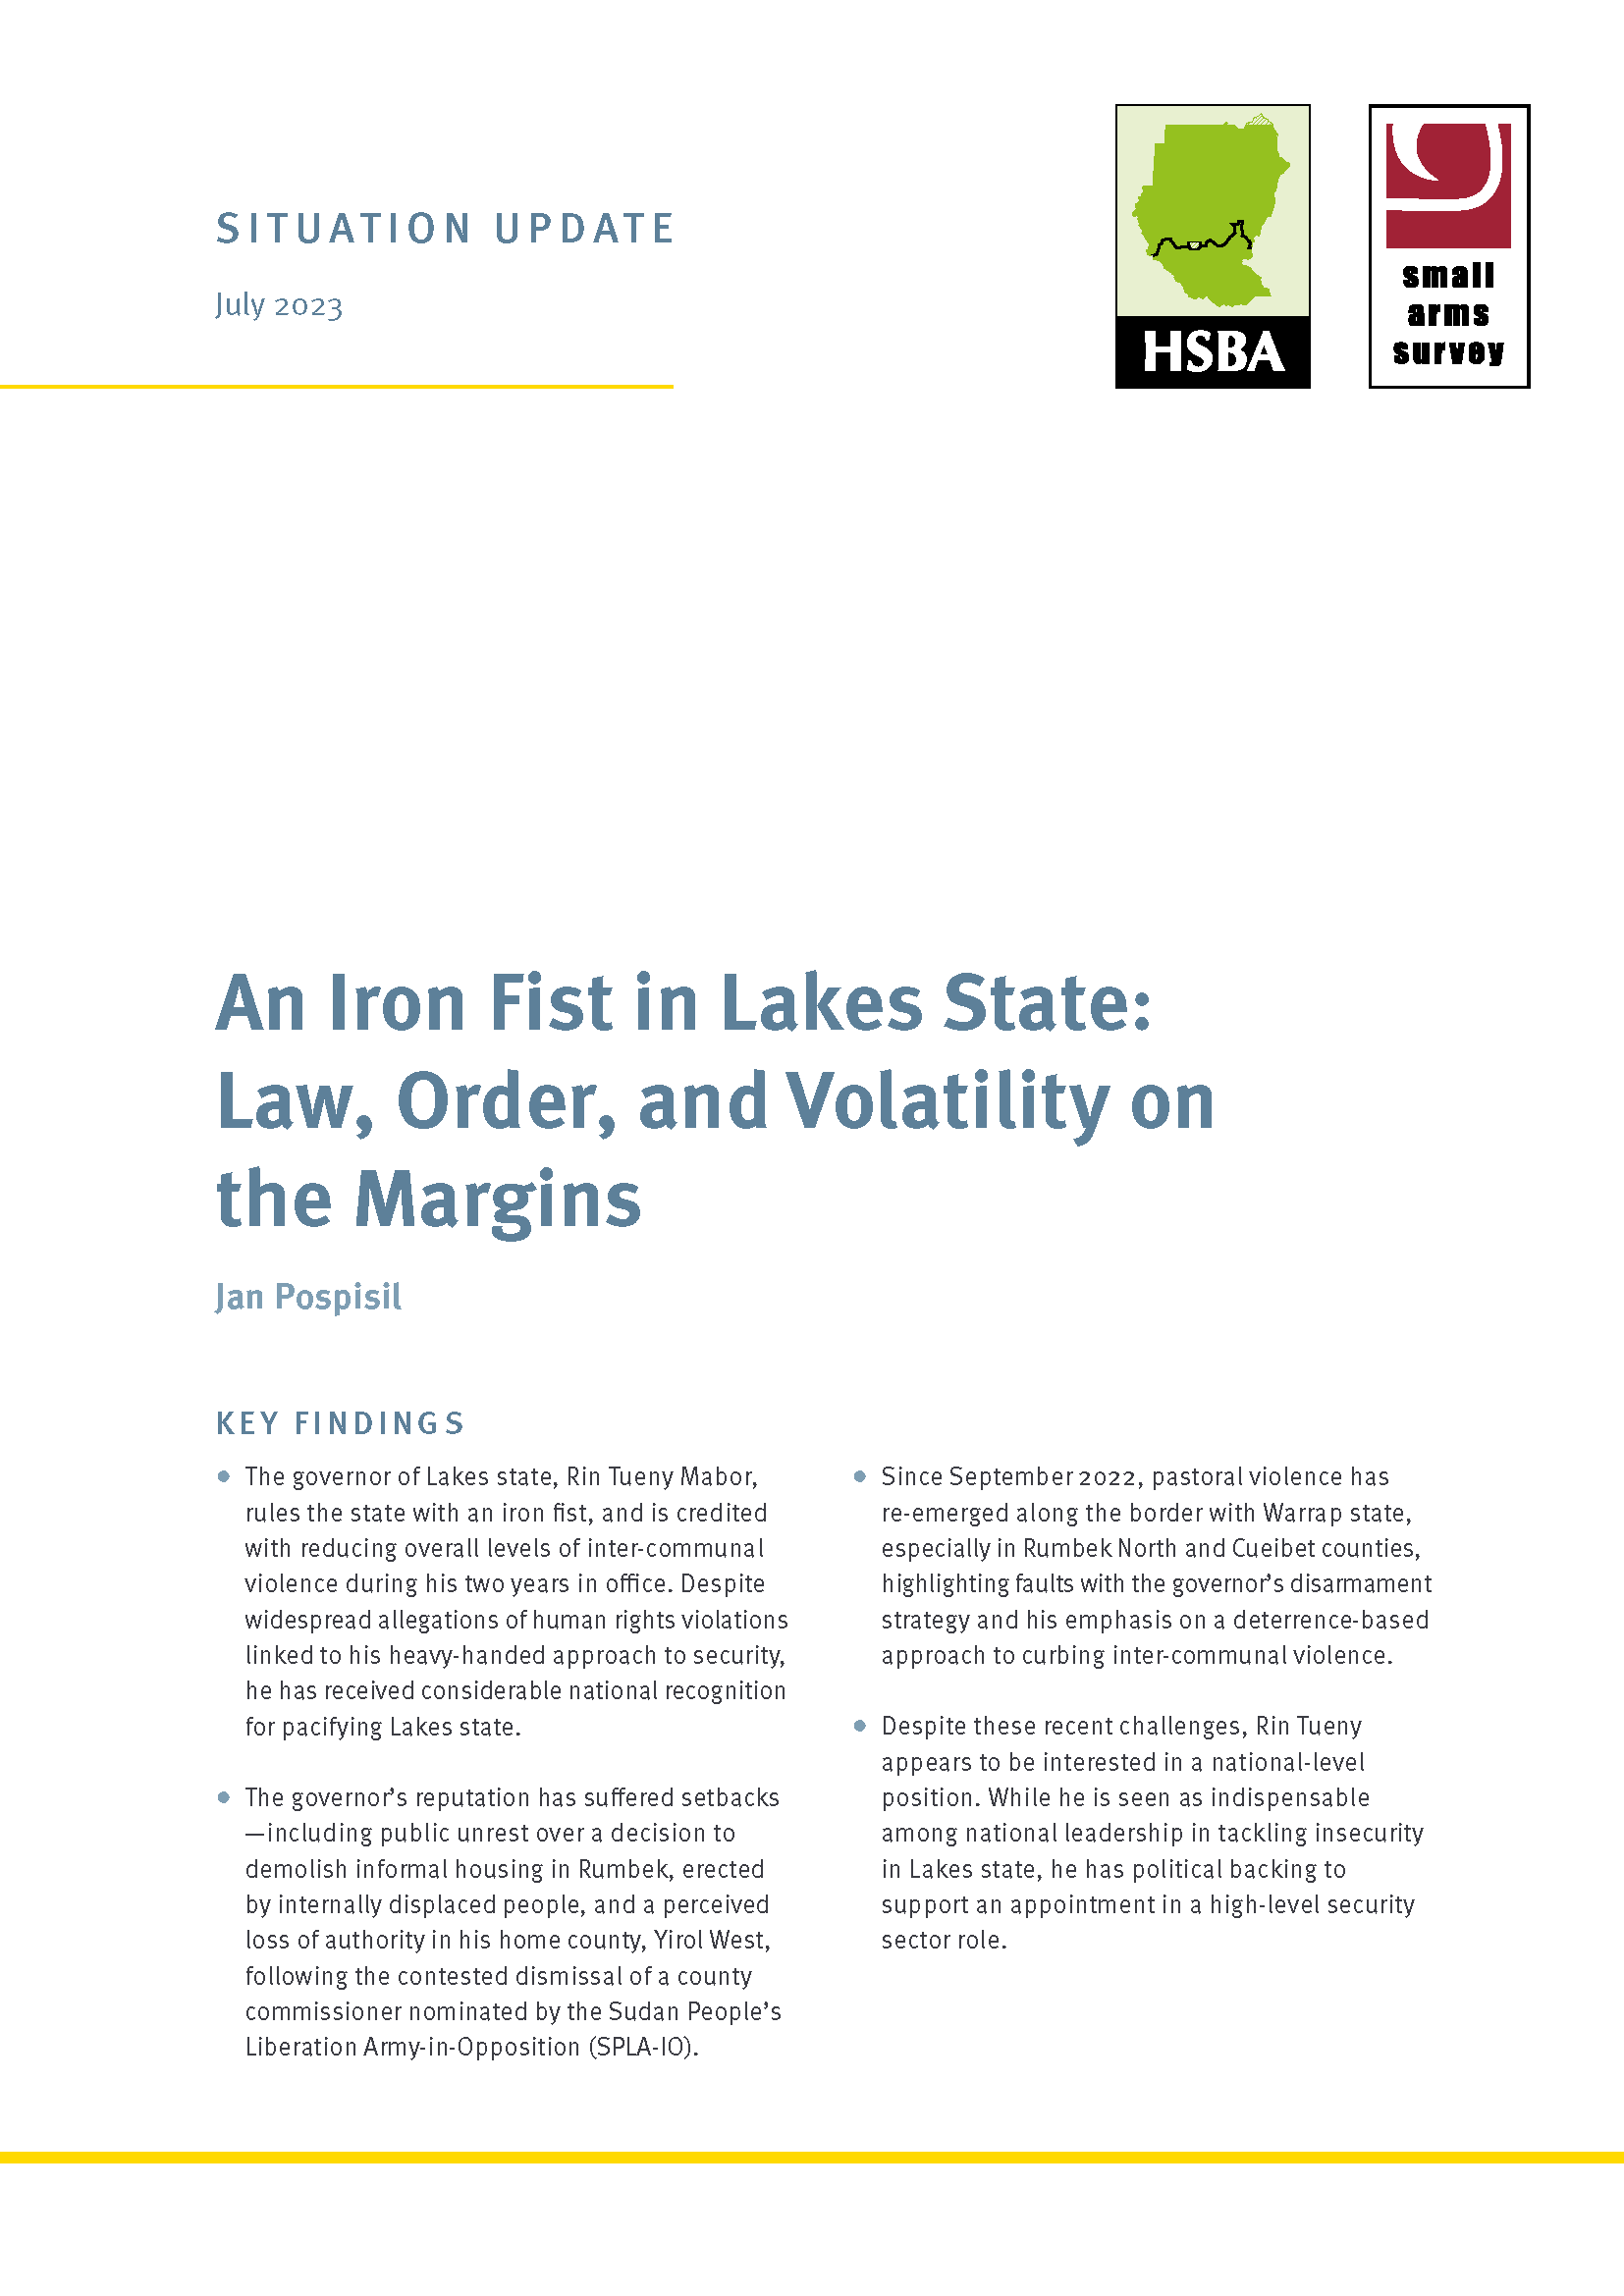 Situation Update An Iron Fist in Lakes State cover image